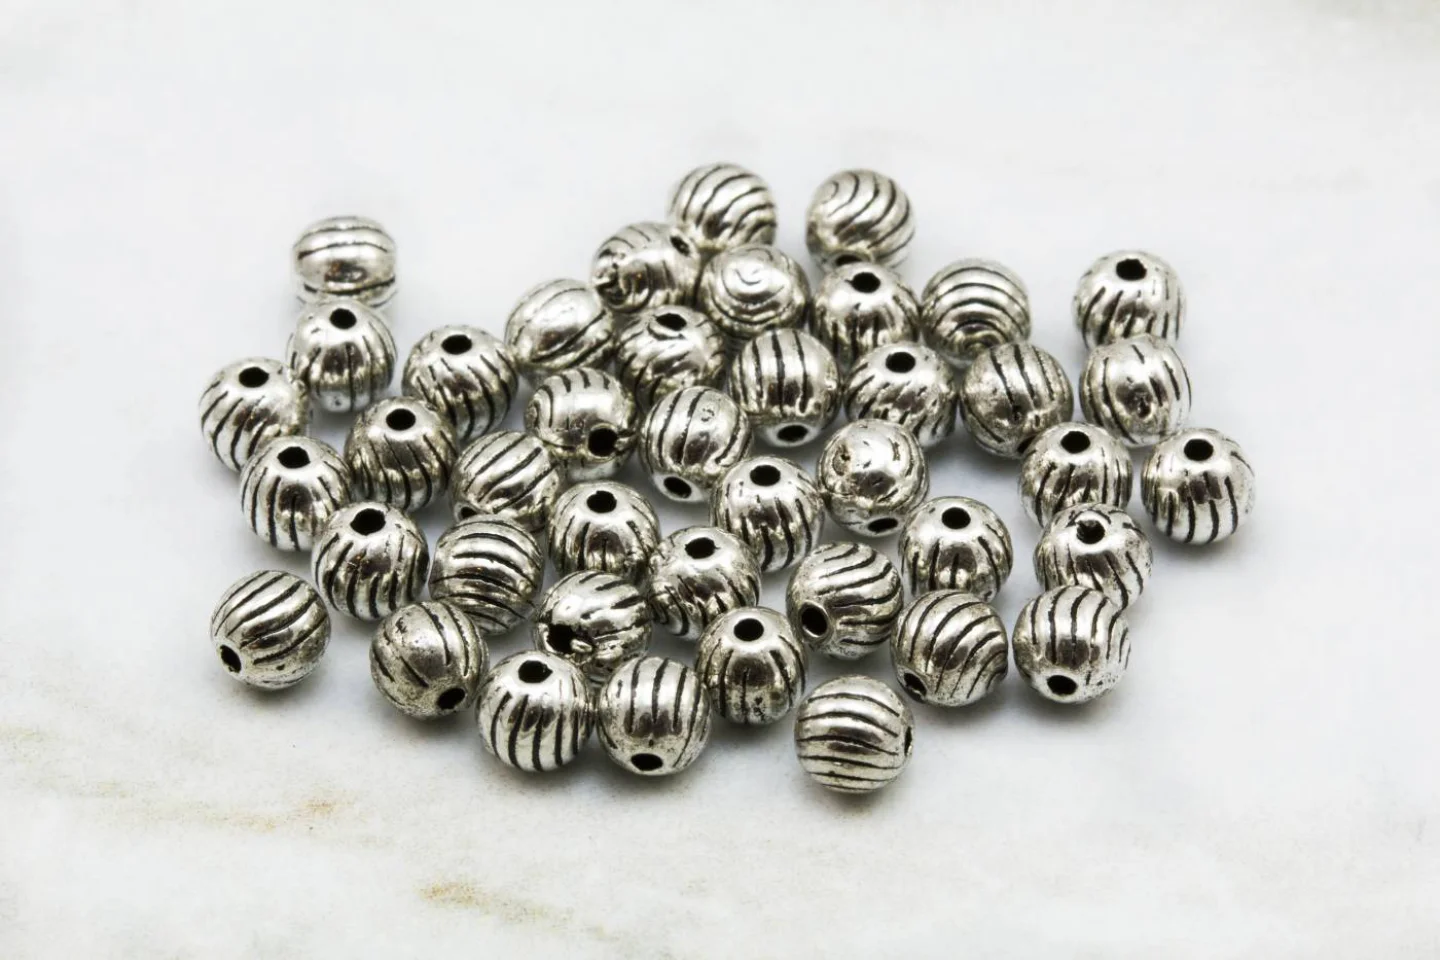 5mm-mini-round-ball-spacer-bead-findings.